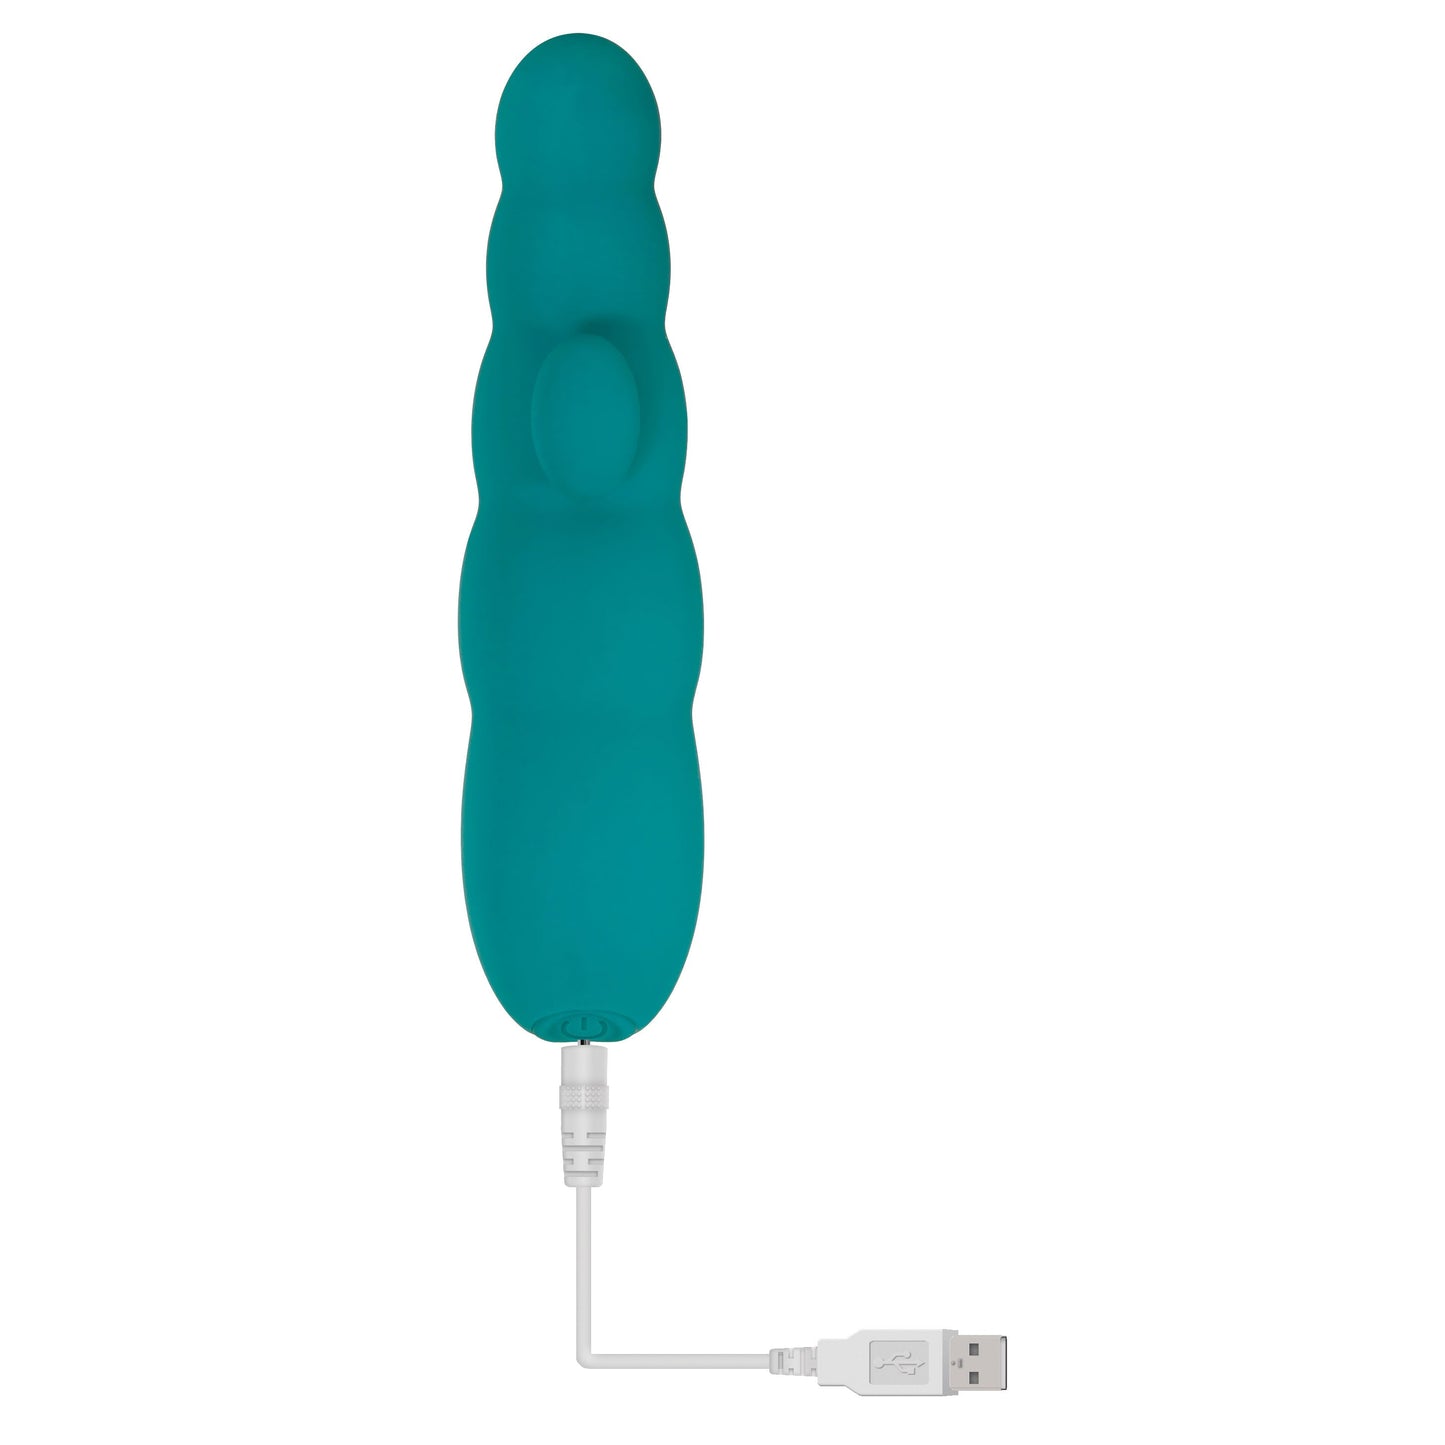 G-Spot Perfection - Teal